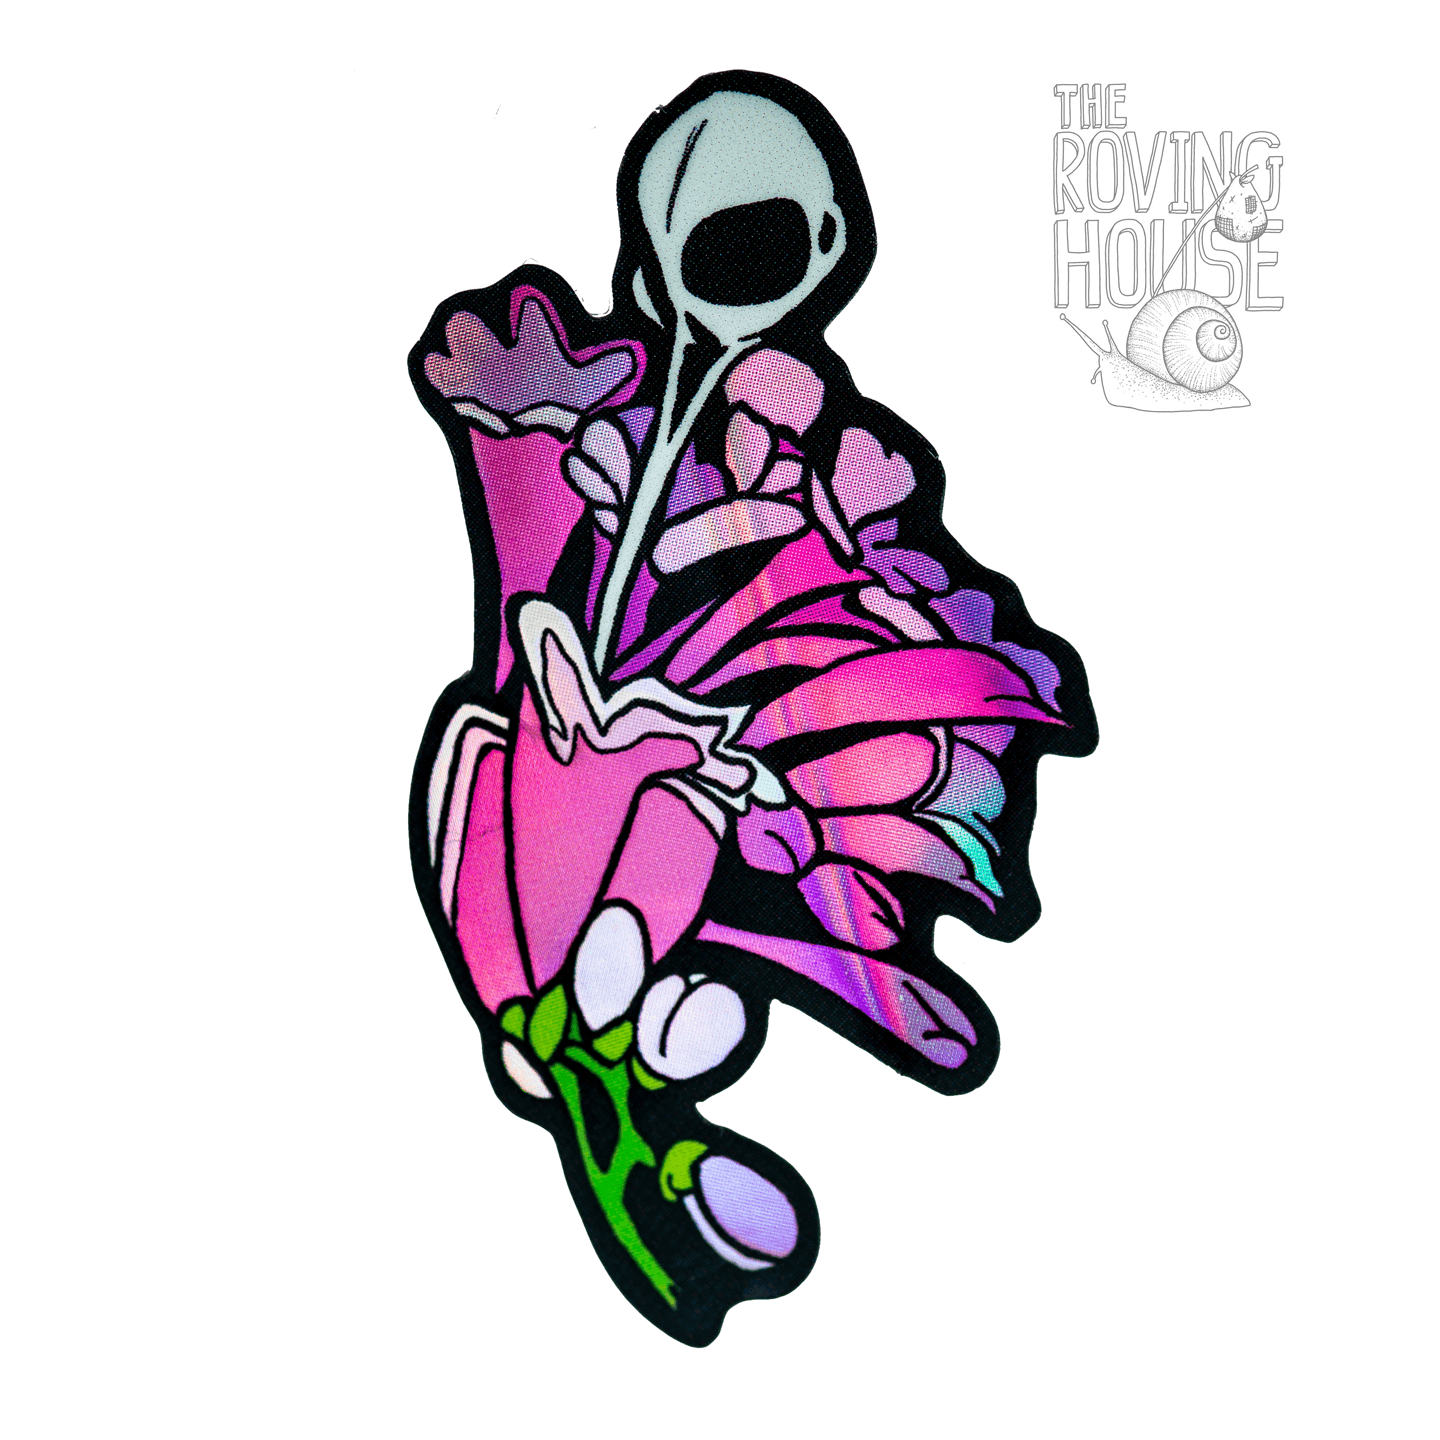 A holographic sticker of a black and white hummingbird skull sipping from pink and purple blossoms.